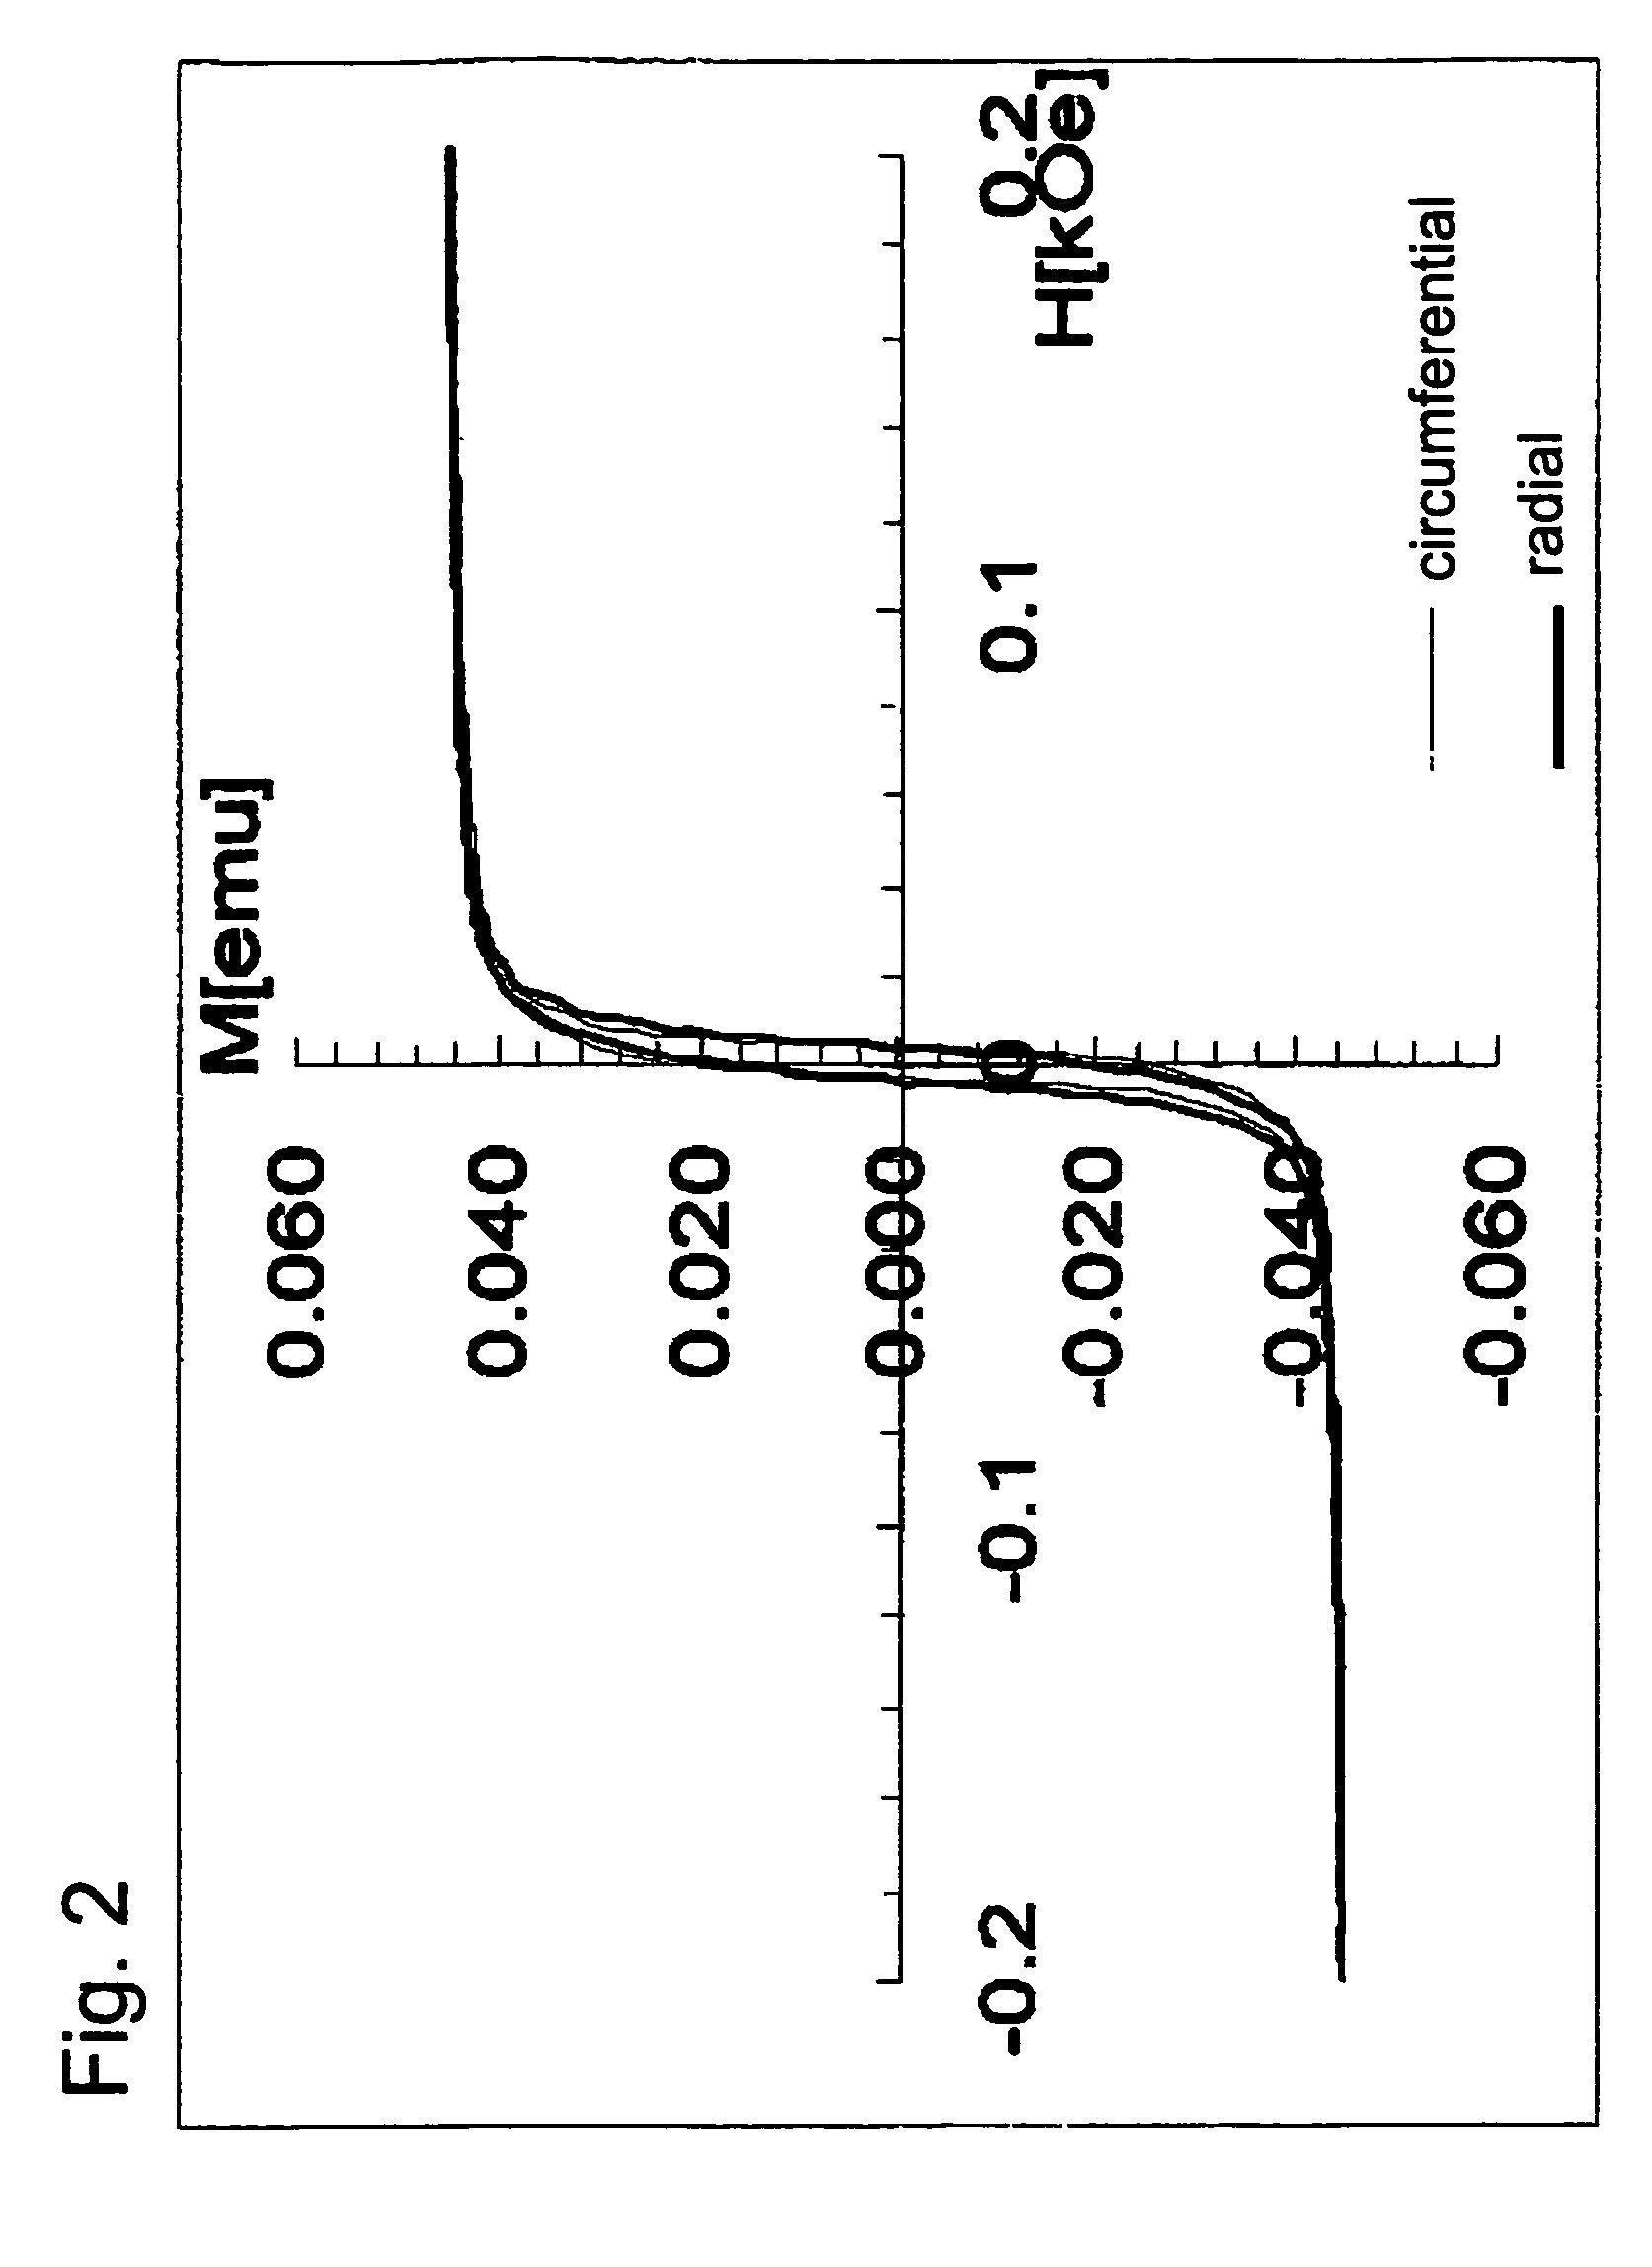 Method of electroless plating on a glass substrate and method of manufacturing a magnetic recording medium using the method of electroless plating